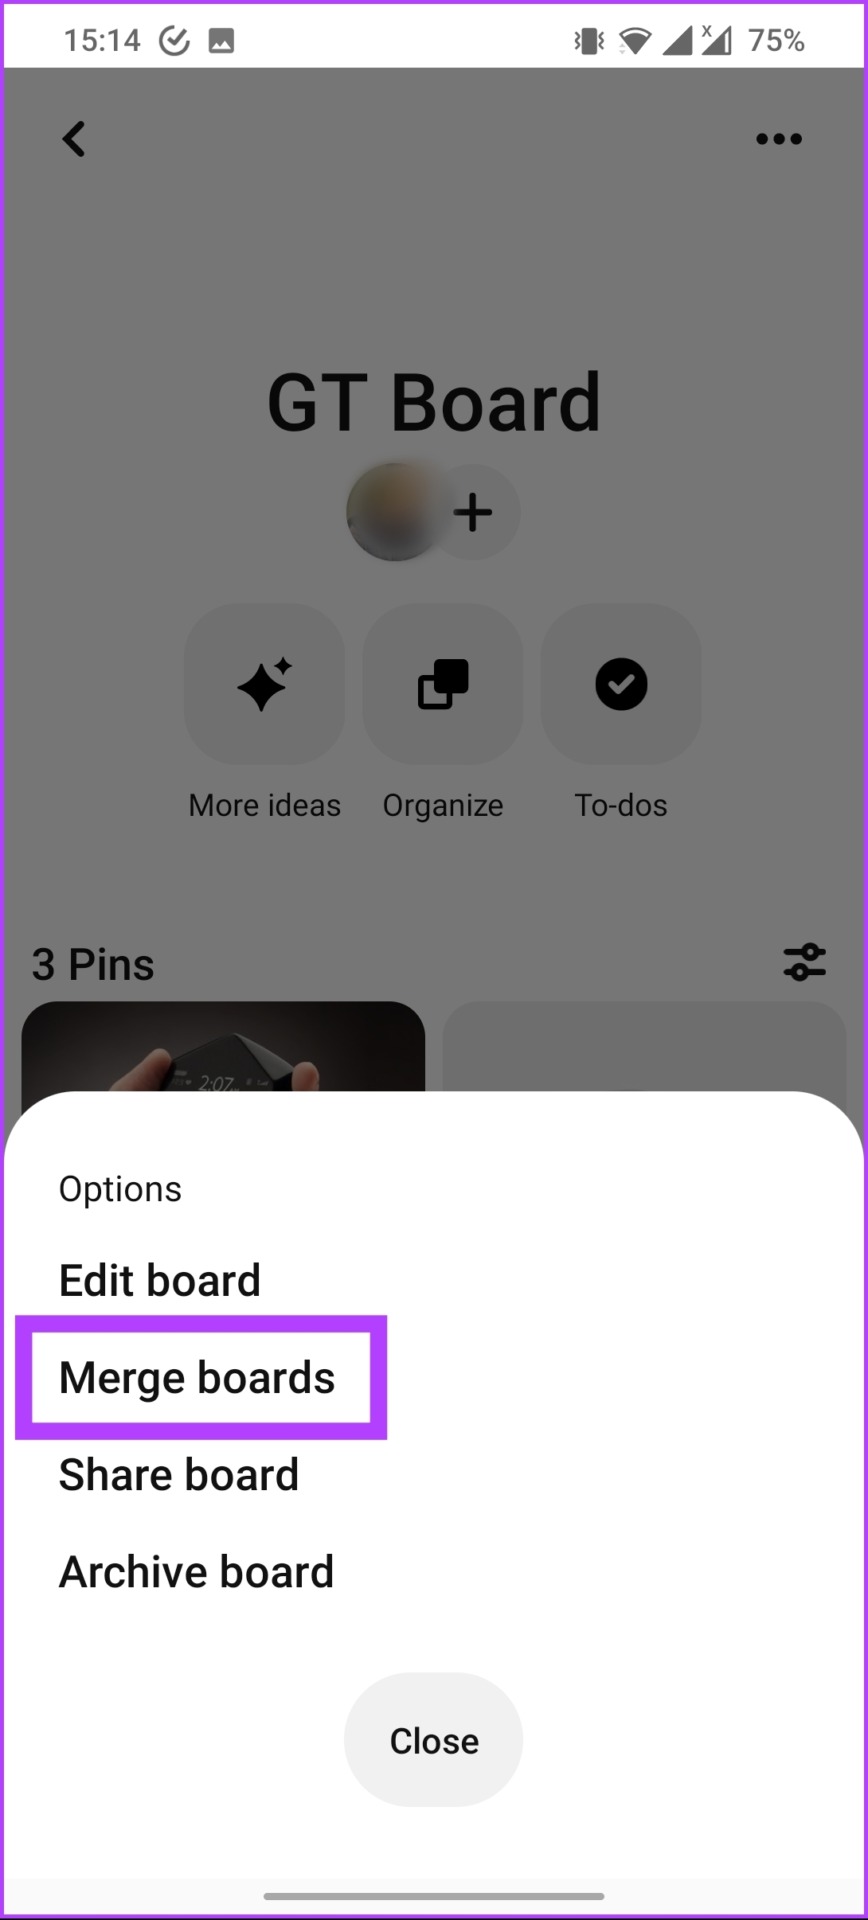 select Merge boards